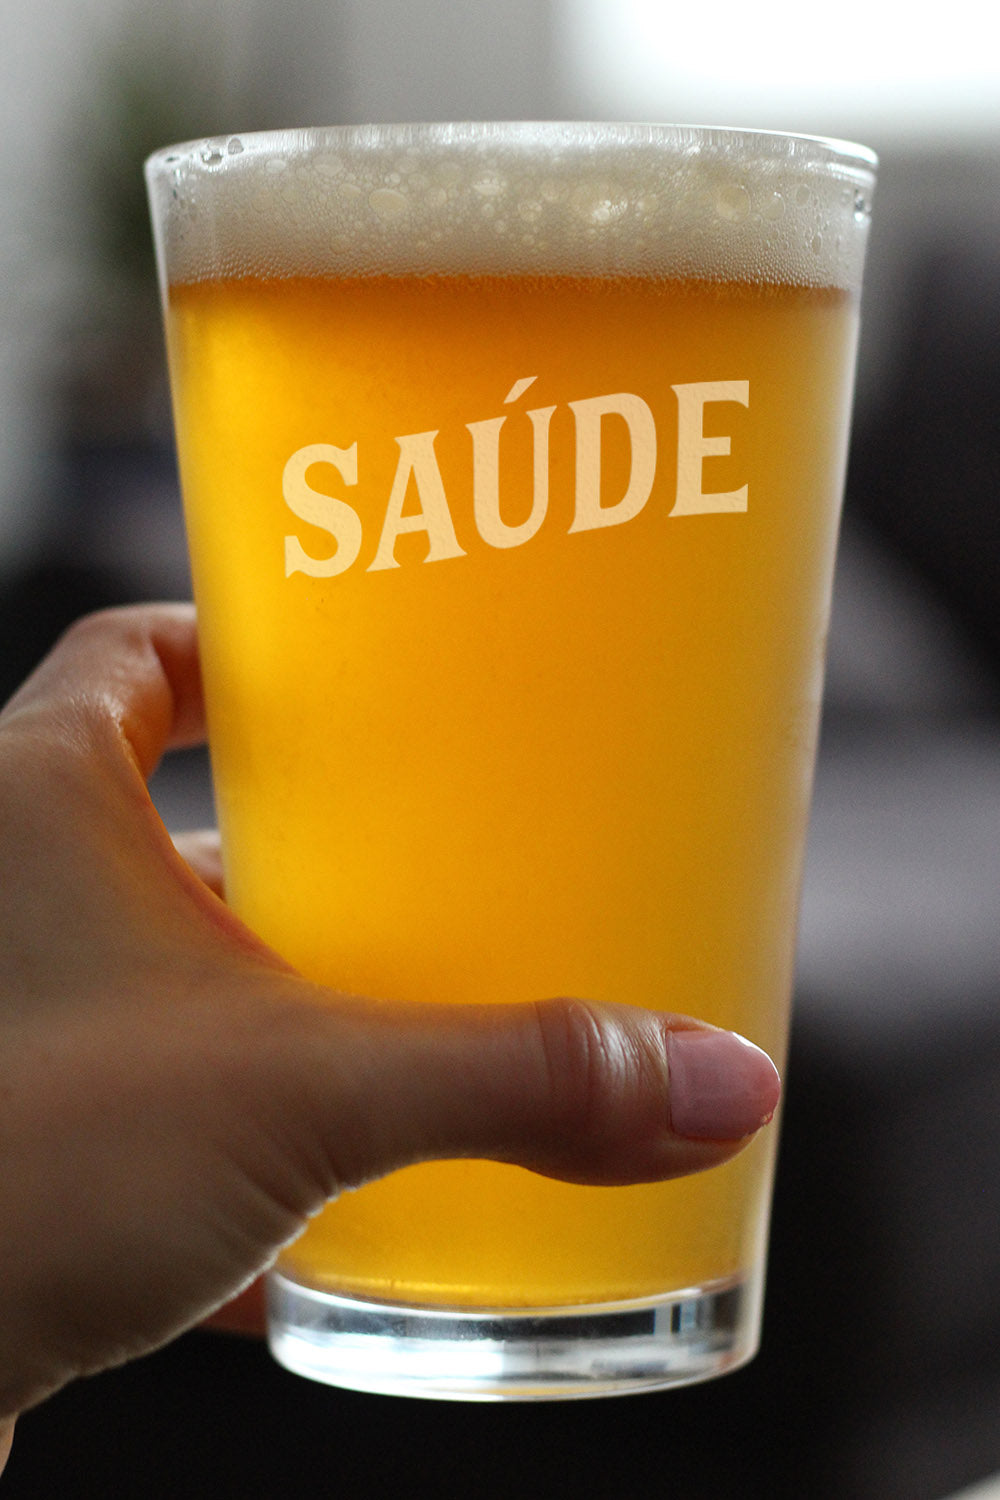 Saude - Portuguese Cheers - Pint Glass for Beer - Cute Brazil Themed Gifts or Party Decor for Women and Men - 16 Oz